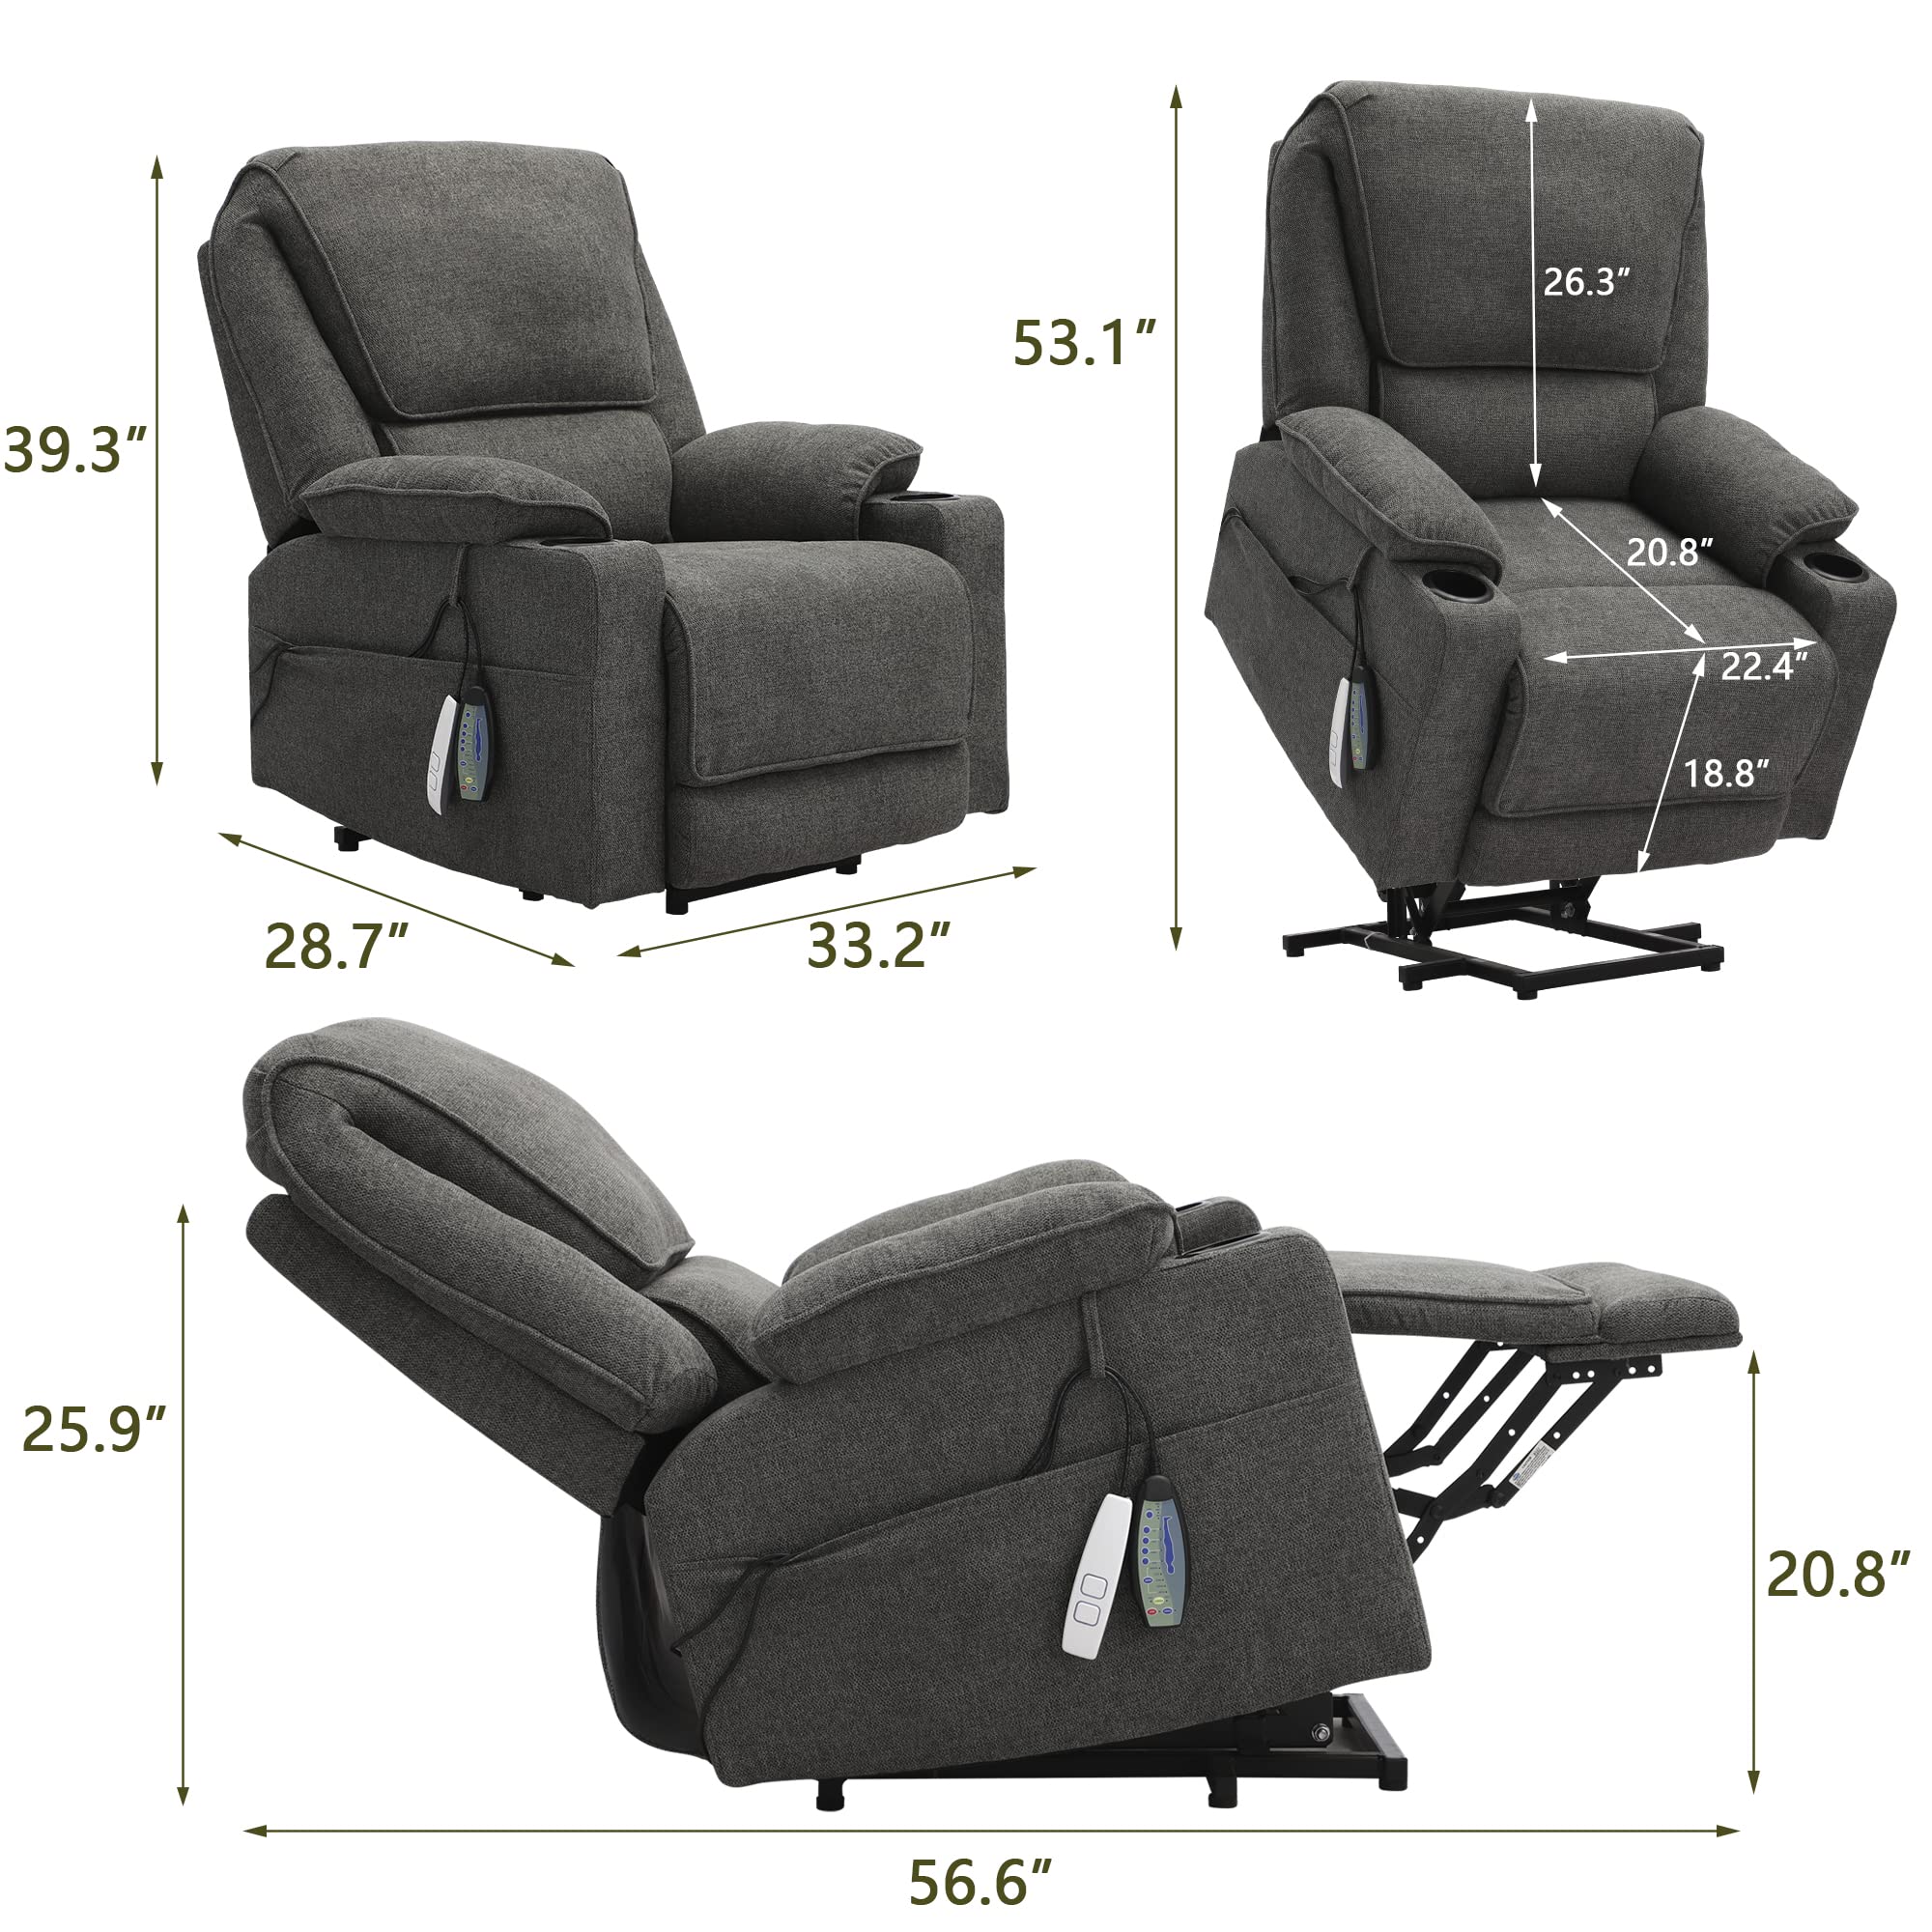 LOUVIXA Recliners Lift Chairs for Elderly, Lazy Boy Recliner Chair with Massager and Heat, Electric Power Lift Chair, USB Port, 2 Side Pockets